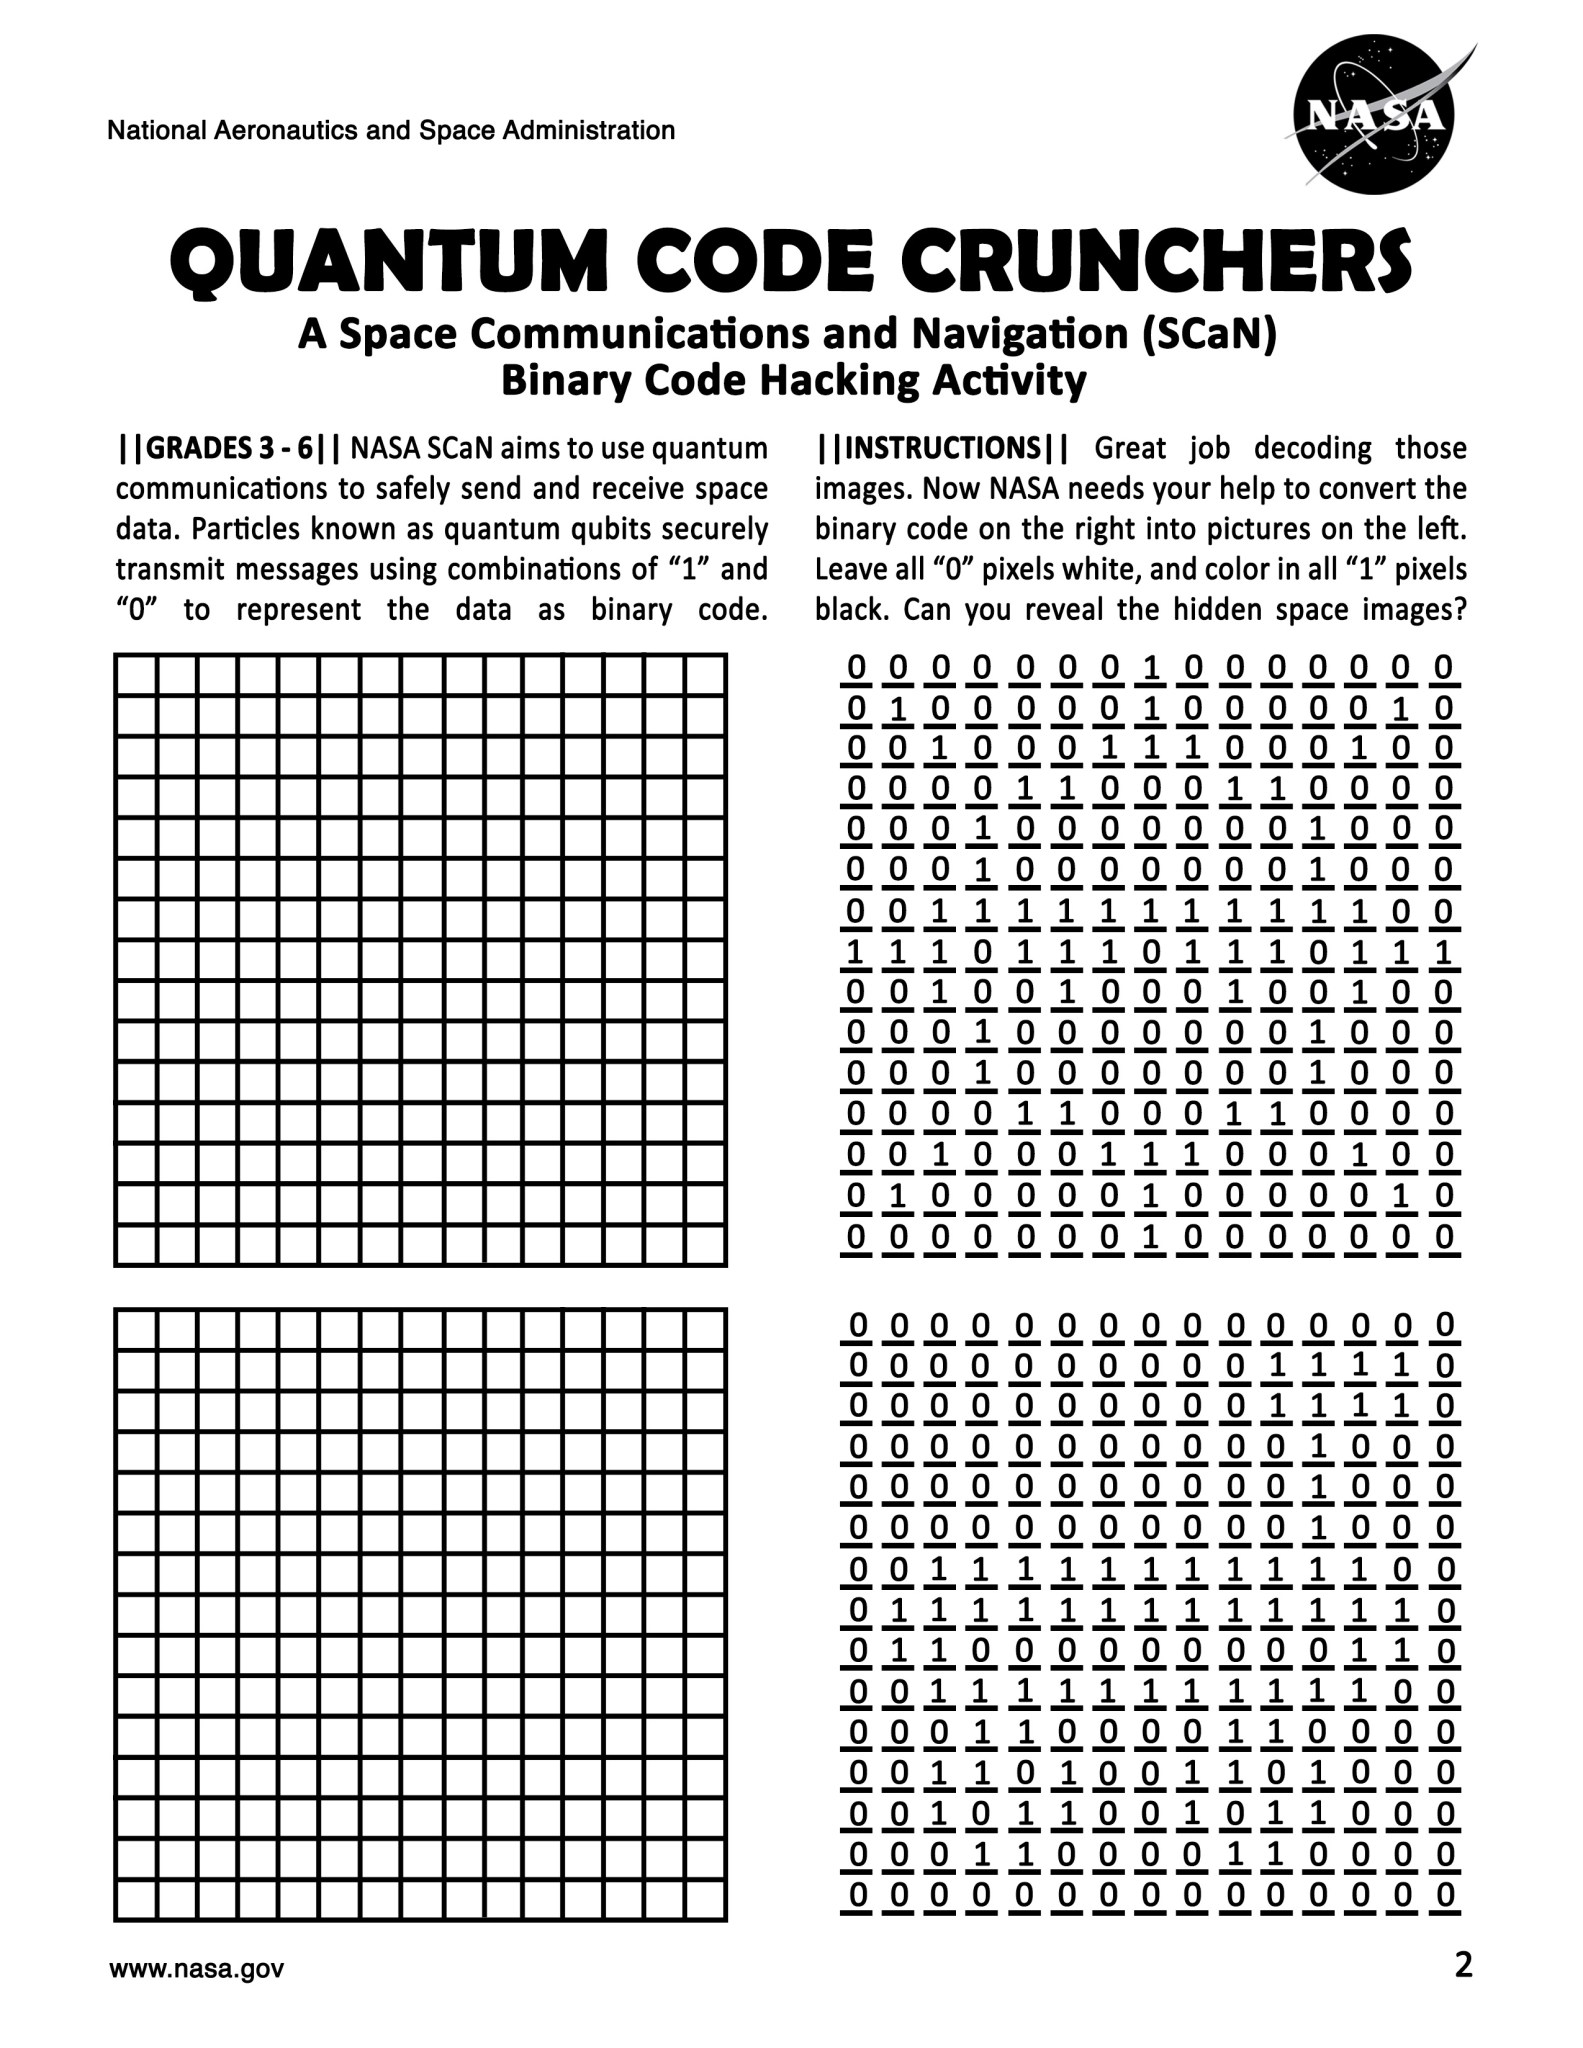 Worksheet with four grids. Text reads: Quantum Code Crunchers, a Space Communications and Navigation (SCaN) Binary Code Hacking Activity.